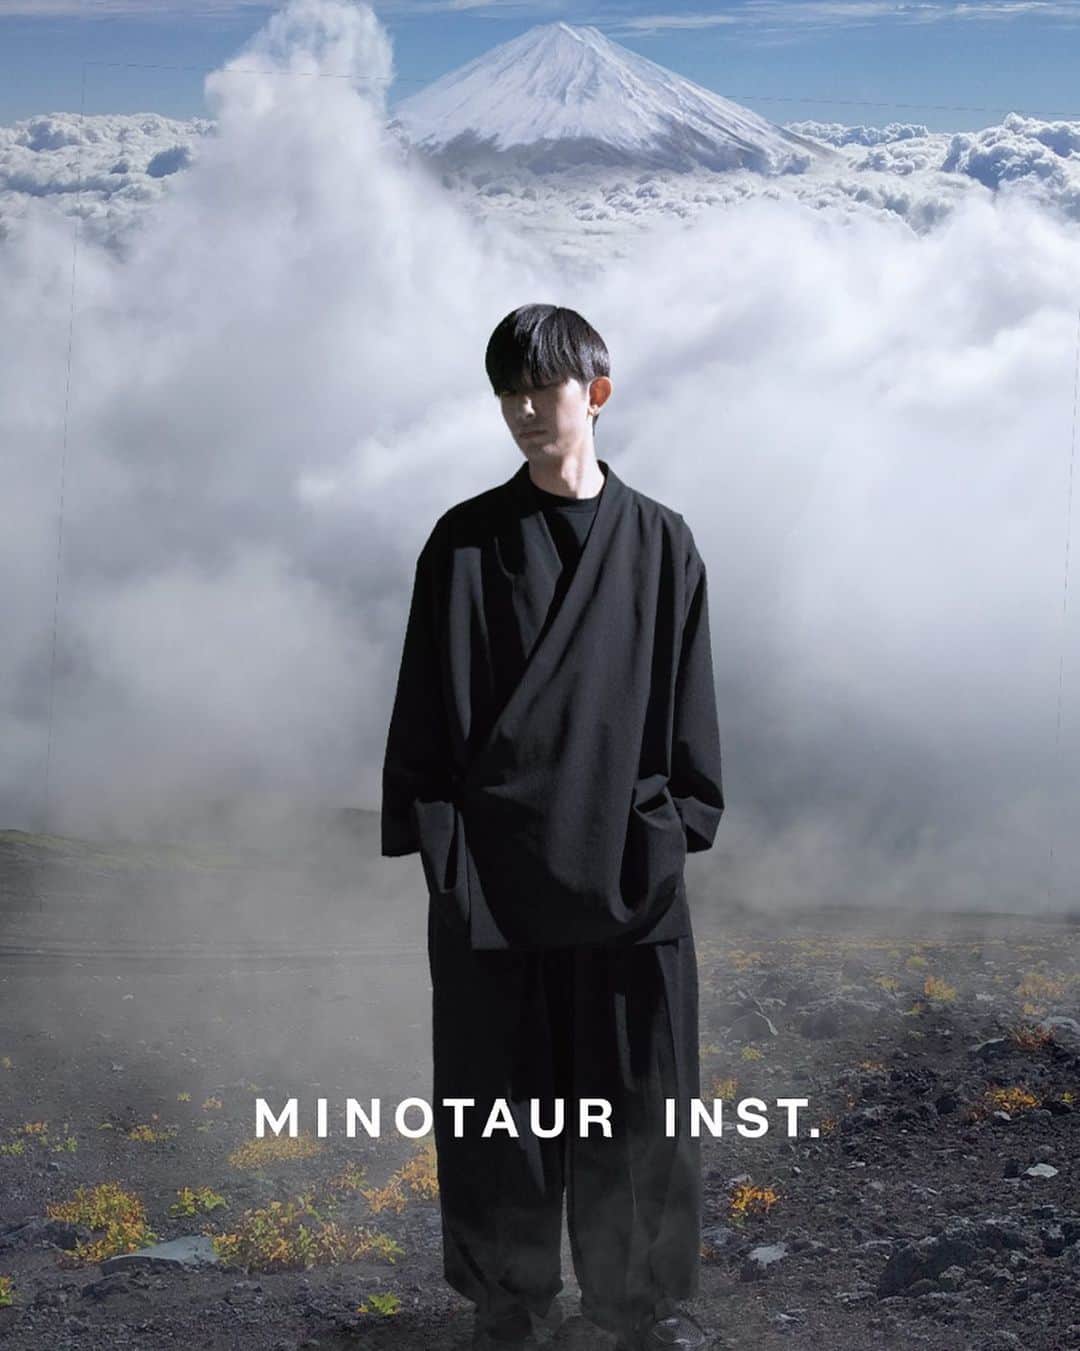 ミノトールのインスタグラム：「MINOTAUR INST. KURO ZONE JACKET  FUNCTION : QUICK DRYING STRETCH WATER ABSORPTION MACHINE WASHABLE NO WRINKLES  Made in Japan  マットでメランジ感とドライ感のある風合いが和物の生地感でありながらも、軽快なストレッチ性とシワのつかない、速乾・ウォッシャブル機能素材で製作された和モダンジャケット。 脇にあるストラップにより開閉ワンタッチホールド。 袖口幅は調整仕様で、両サイドの脇裾切替位置にハンドポケット。 京都 両足院とのコラボレーションにより坐禅から日常作業までをスマートに過ごせる現代の作務衣を製作。 (実際に両足院にて使用中の TECH SAMUE)  A modern Japanese jacket that has a matte melange and dry texture that feels like Japanese fabric, but is made from a quick-drying, washable functional material that has light stretch and wrinkle-free properties. One-touch hold for opening and closing with the strap on the side. The cuff width is adjustable, and there are hand pockets on both sides at the side hem switching positions. In collaboration with Ryosokuin in Kyoto, we have produced modern Samue that allows you to stay smart from zazen to daily work. (His TECH SAMUE actually being used at Ryosokuin)  MINOTAUR INST. KURO HAKAMA PANTS  FUNCTION : QUICK DRYING STRETCH WATER ABSORPTION MACHINE WASHABLE NO WRINKLES  Made in Japan  現代生活で快適な素材、パーツ、ディティールによってアップデートした和モダンパンツ。 マットでメランジ感とドライ感のある風合いが和物の生地感でありながらも、軽快なストレッチ性とシワを軽減する、速乾・ウォッシャブル機能素材を使用。 ウエストのストラップは開閉ワンタッチホールド。 ワイドシルエットでありながら、裾幅を狭くすることが可能な仕様。 同素材アイテムとのセットアップ可能。  Japanese modern pants updated with comfortable materials, parts and details for modern life. Although it has a matte, melange and dry texture, it uses a quick-drying and washable functional material that has light stretch and reduces wrinkles. The waist strap can be opened and closed with one touch. It has a wide silhouette, but the hem width can be narrowed. Can be set up with items of the same material.  #minotaur_inst #minotaurinst #minotaur #minotaur_shop #ミノトールインスト #ミノトール #zonejacket #ryosokuin #kuroseries #坐禅 #zen #mindfulness #mindfulnesswear #機能アウター #テクニカルフード #techpants #機能パンツ #relaxsmart #リラックススマート #はかまパンツ #hakamapants #hakama #japanesemodan」